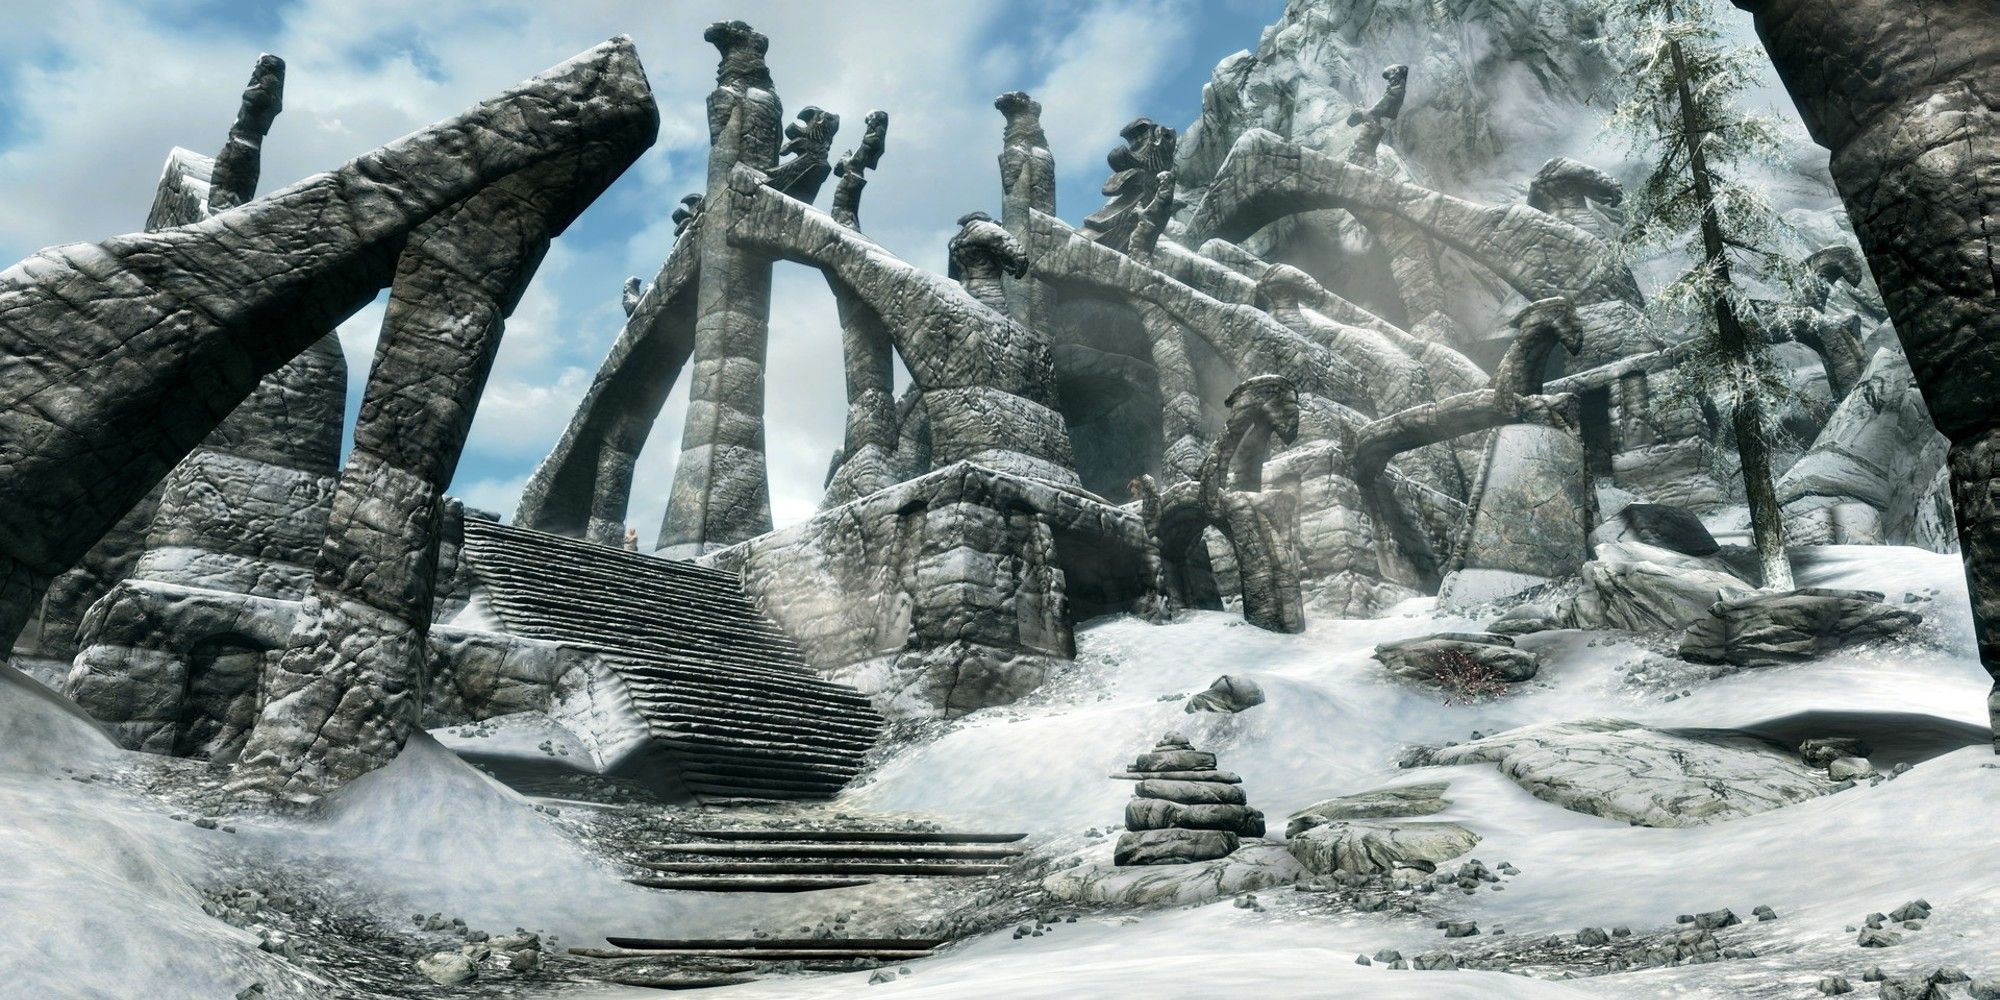 Snowy mountain ruins from Skyrim.